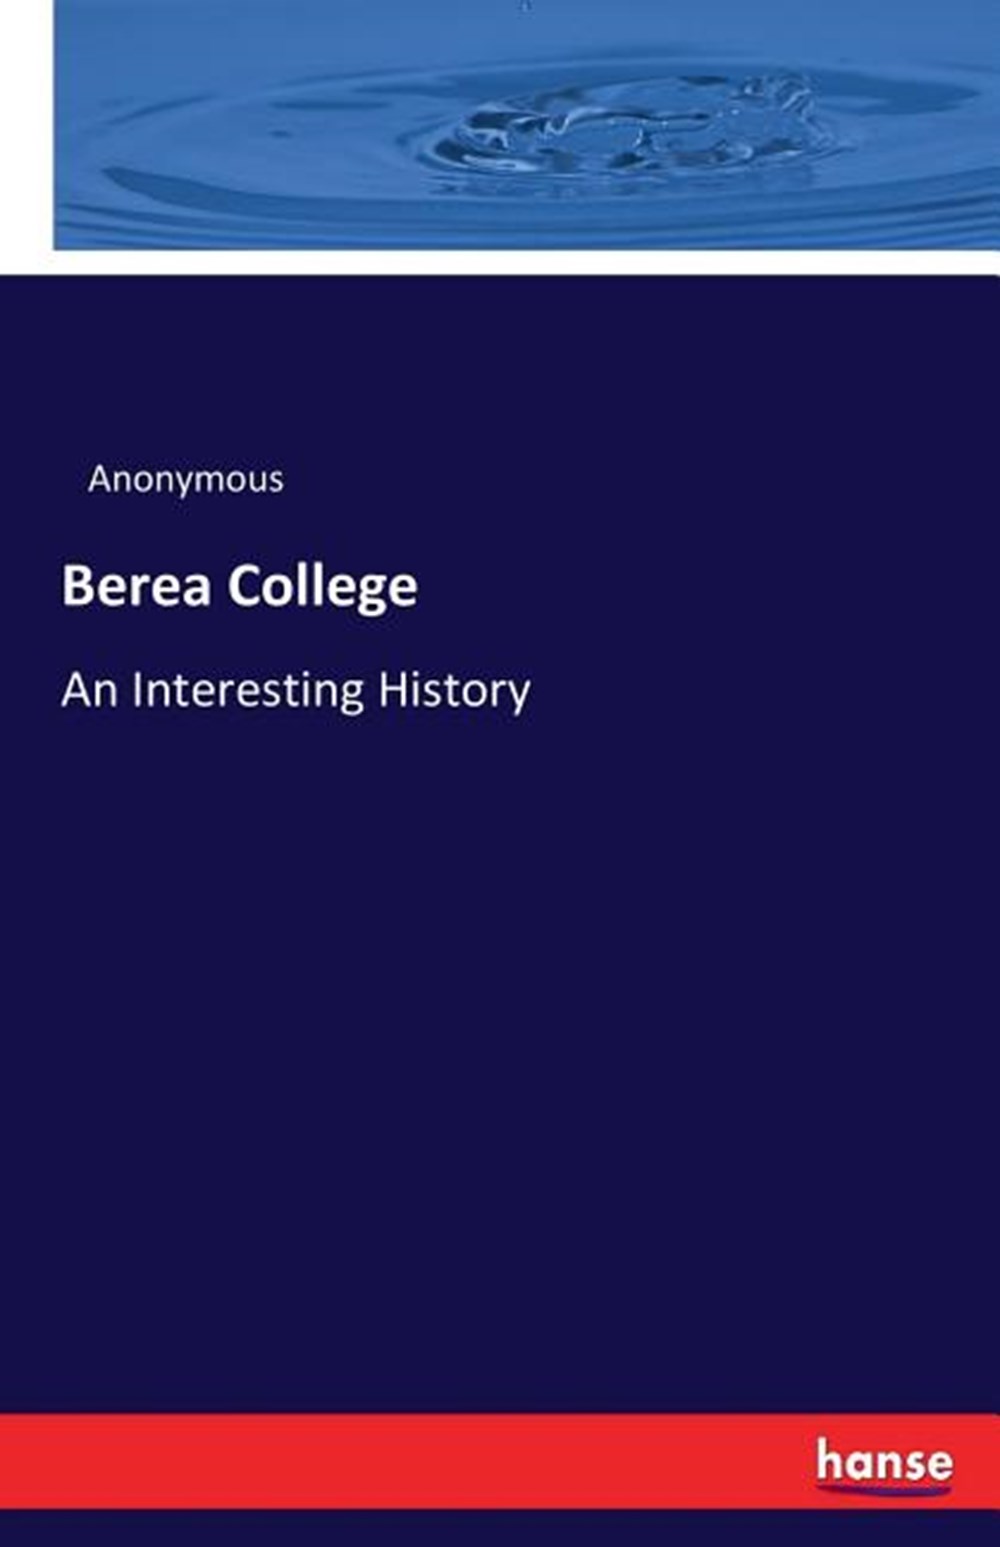 Berea College: An Interesting History